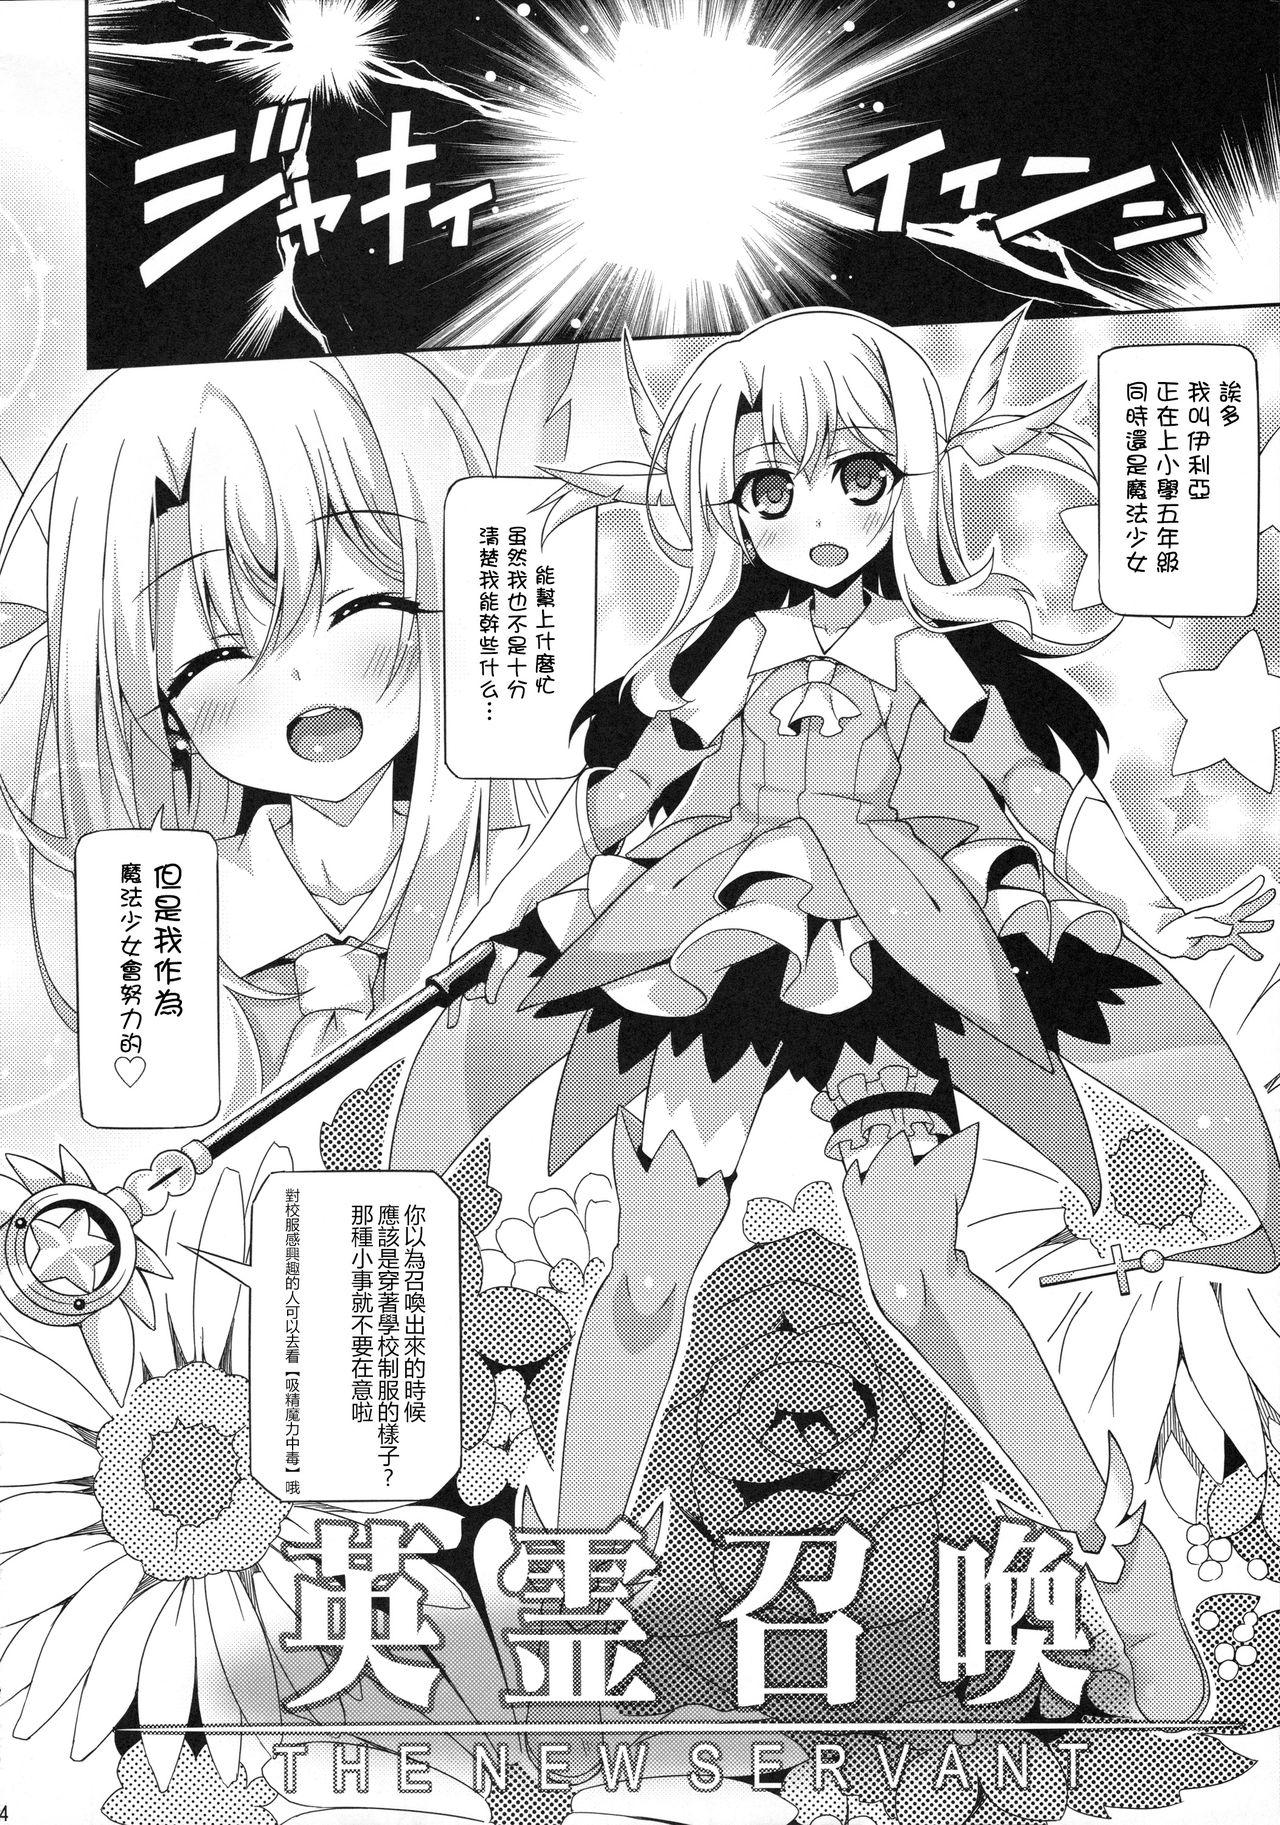 Animation Illya-chan to Love Love Reijyux - Fate grand order Fate kaleid liner prisma illya France - Page 8